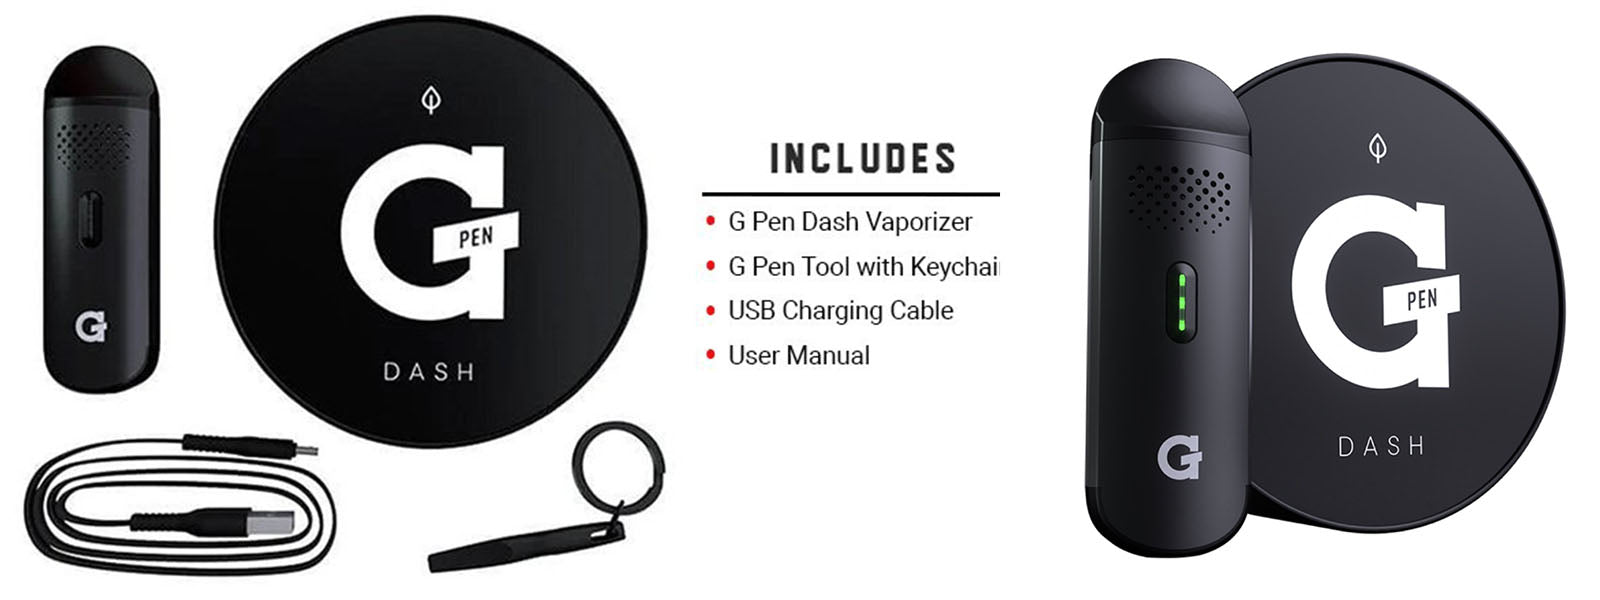 What comes with the G Pen Dash